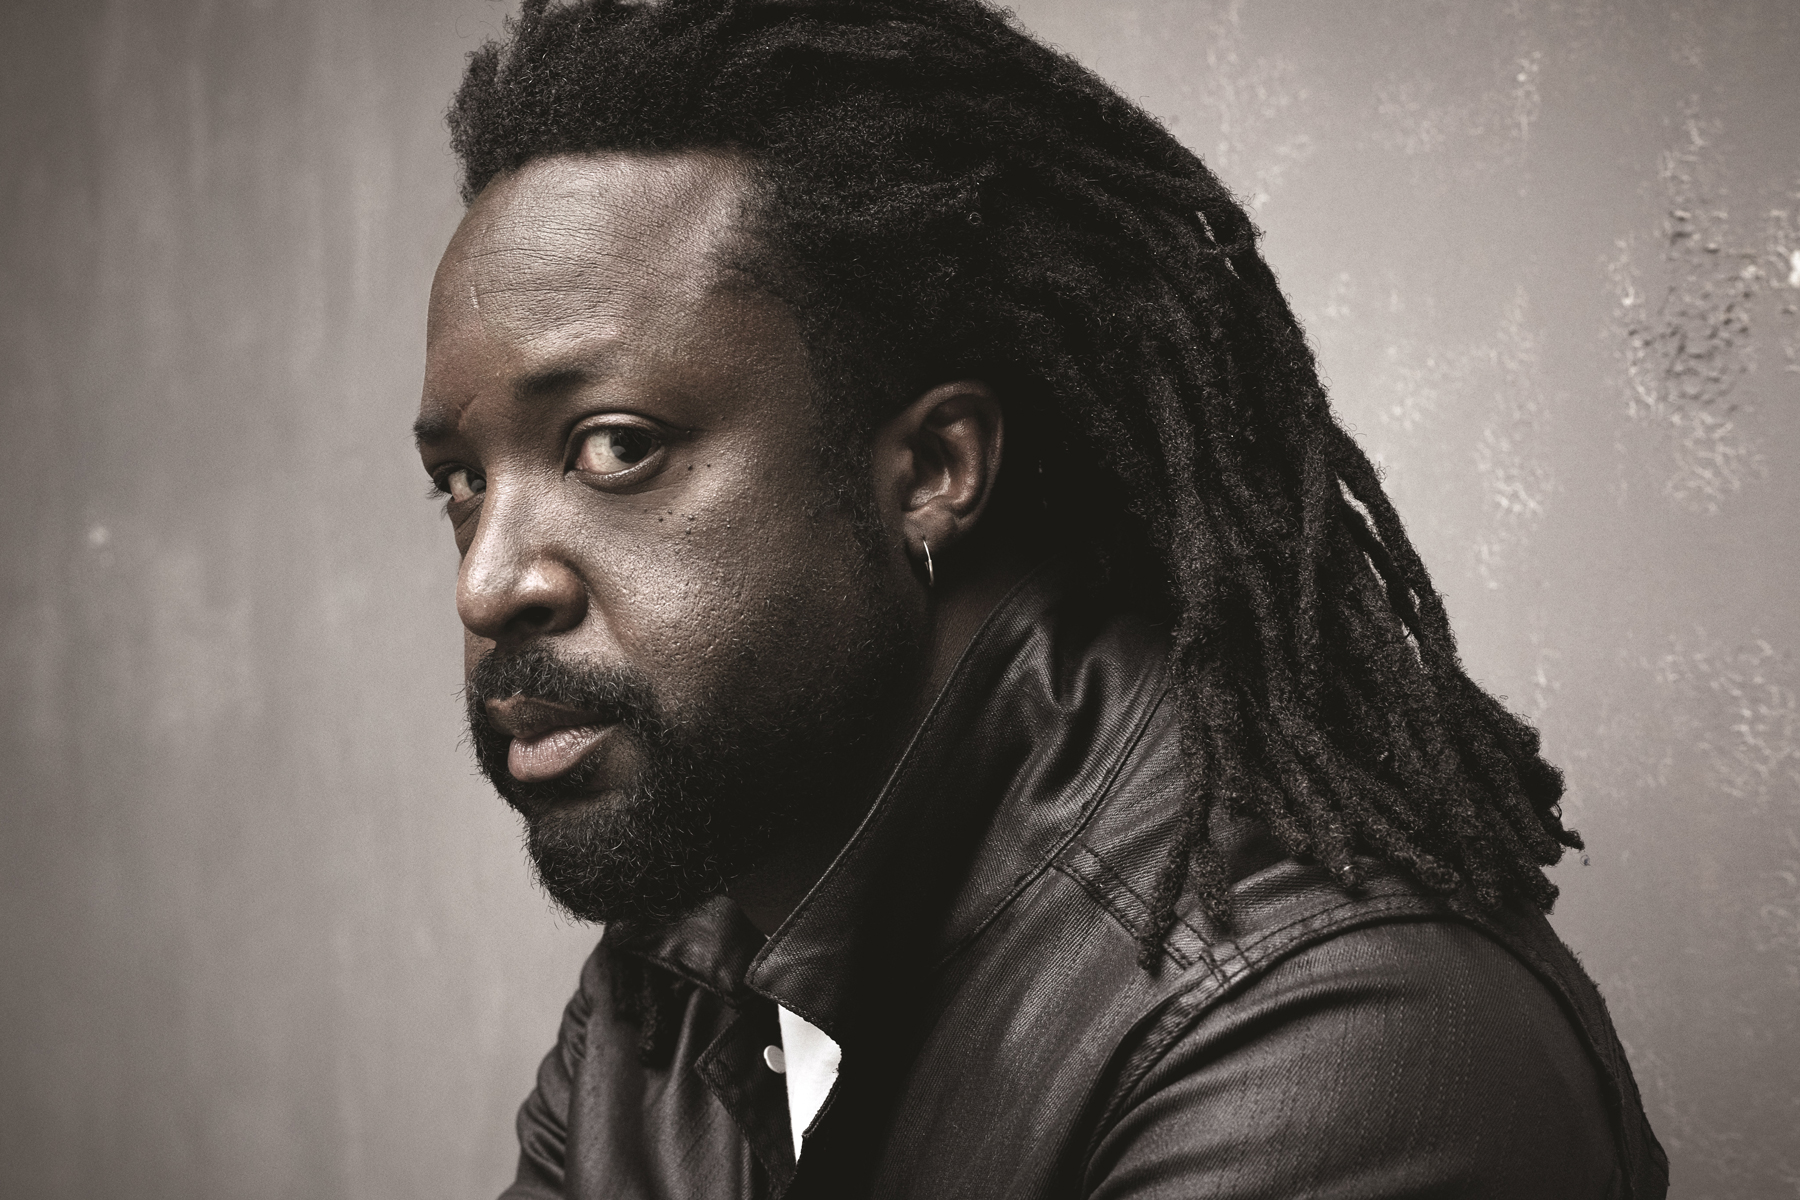 Los Angeles Times Ray Bradbury Book Prize for Science Fiction, Fantasy & Speculative Fiction: Marlon James, Black Leopard, Red Wolf (The Dark Star Trilogy Book 1), Riverhead 